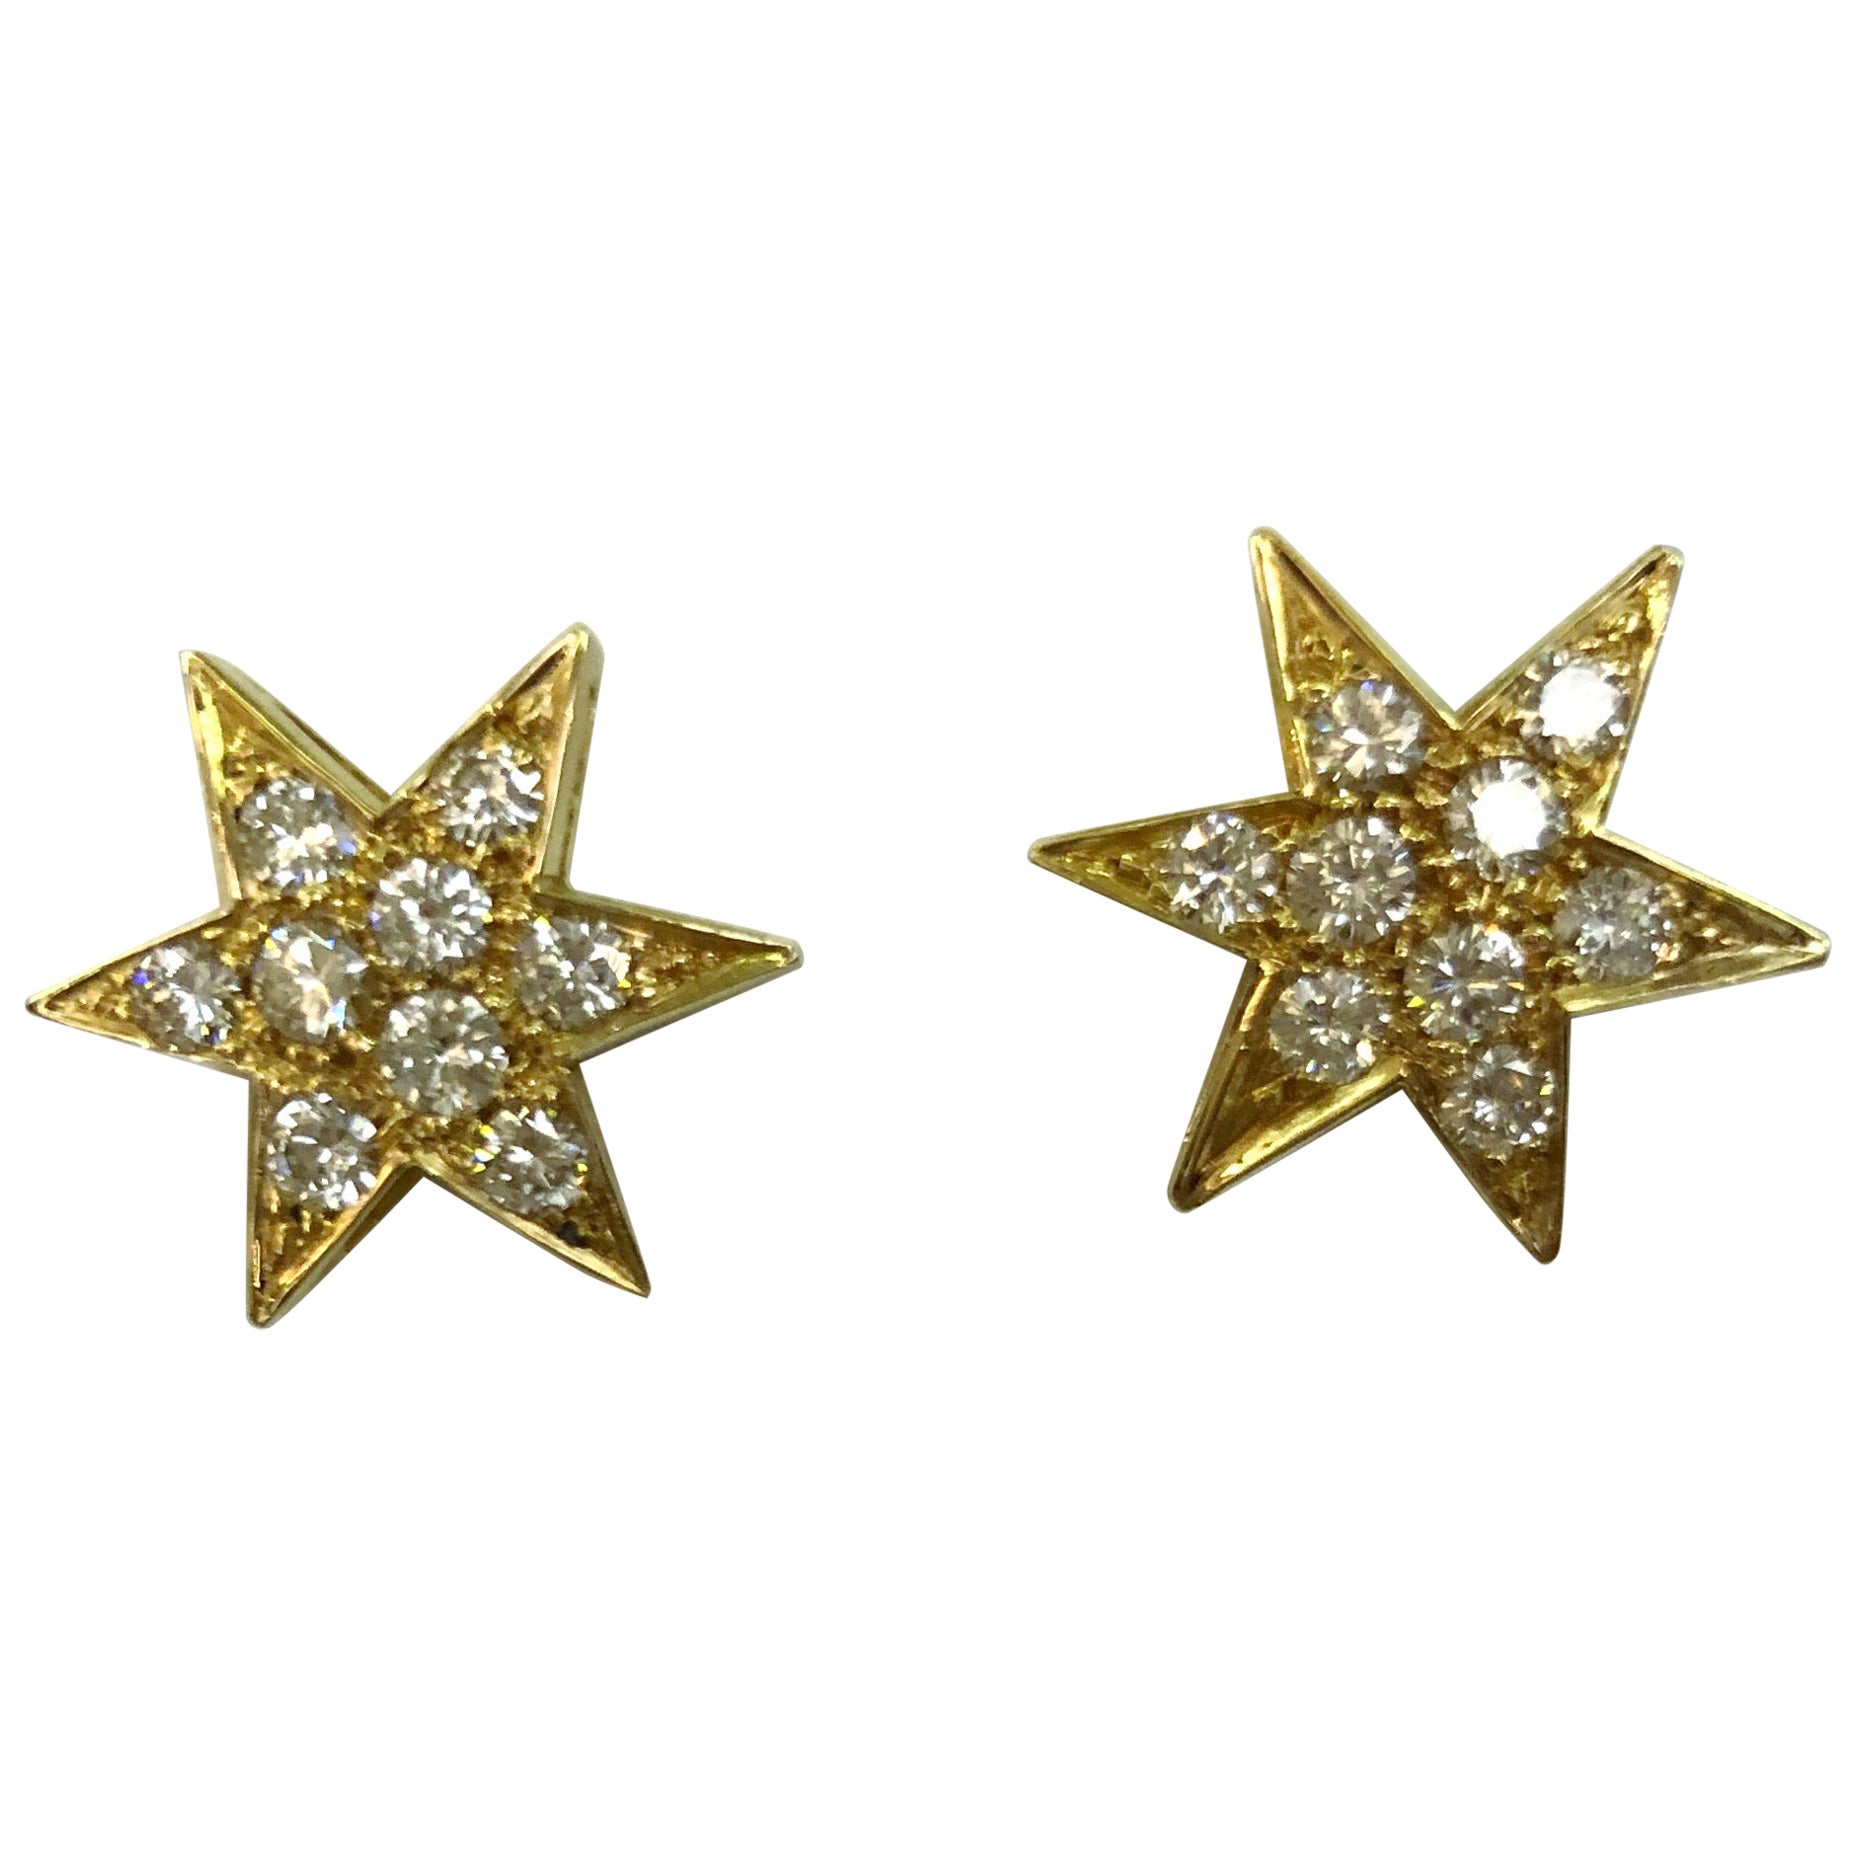 Pair of Yellow Gold and Diamond Star Earrings